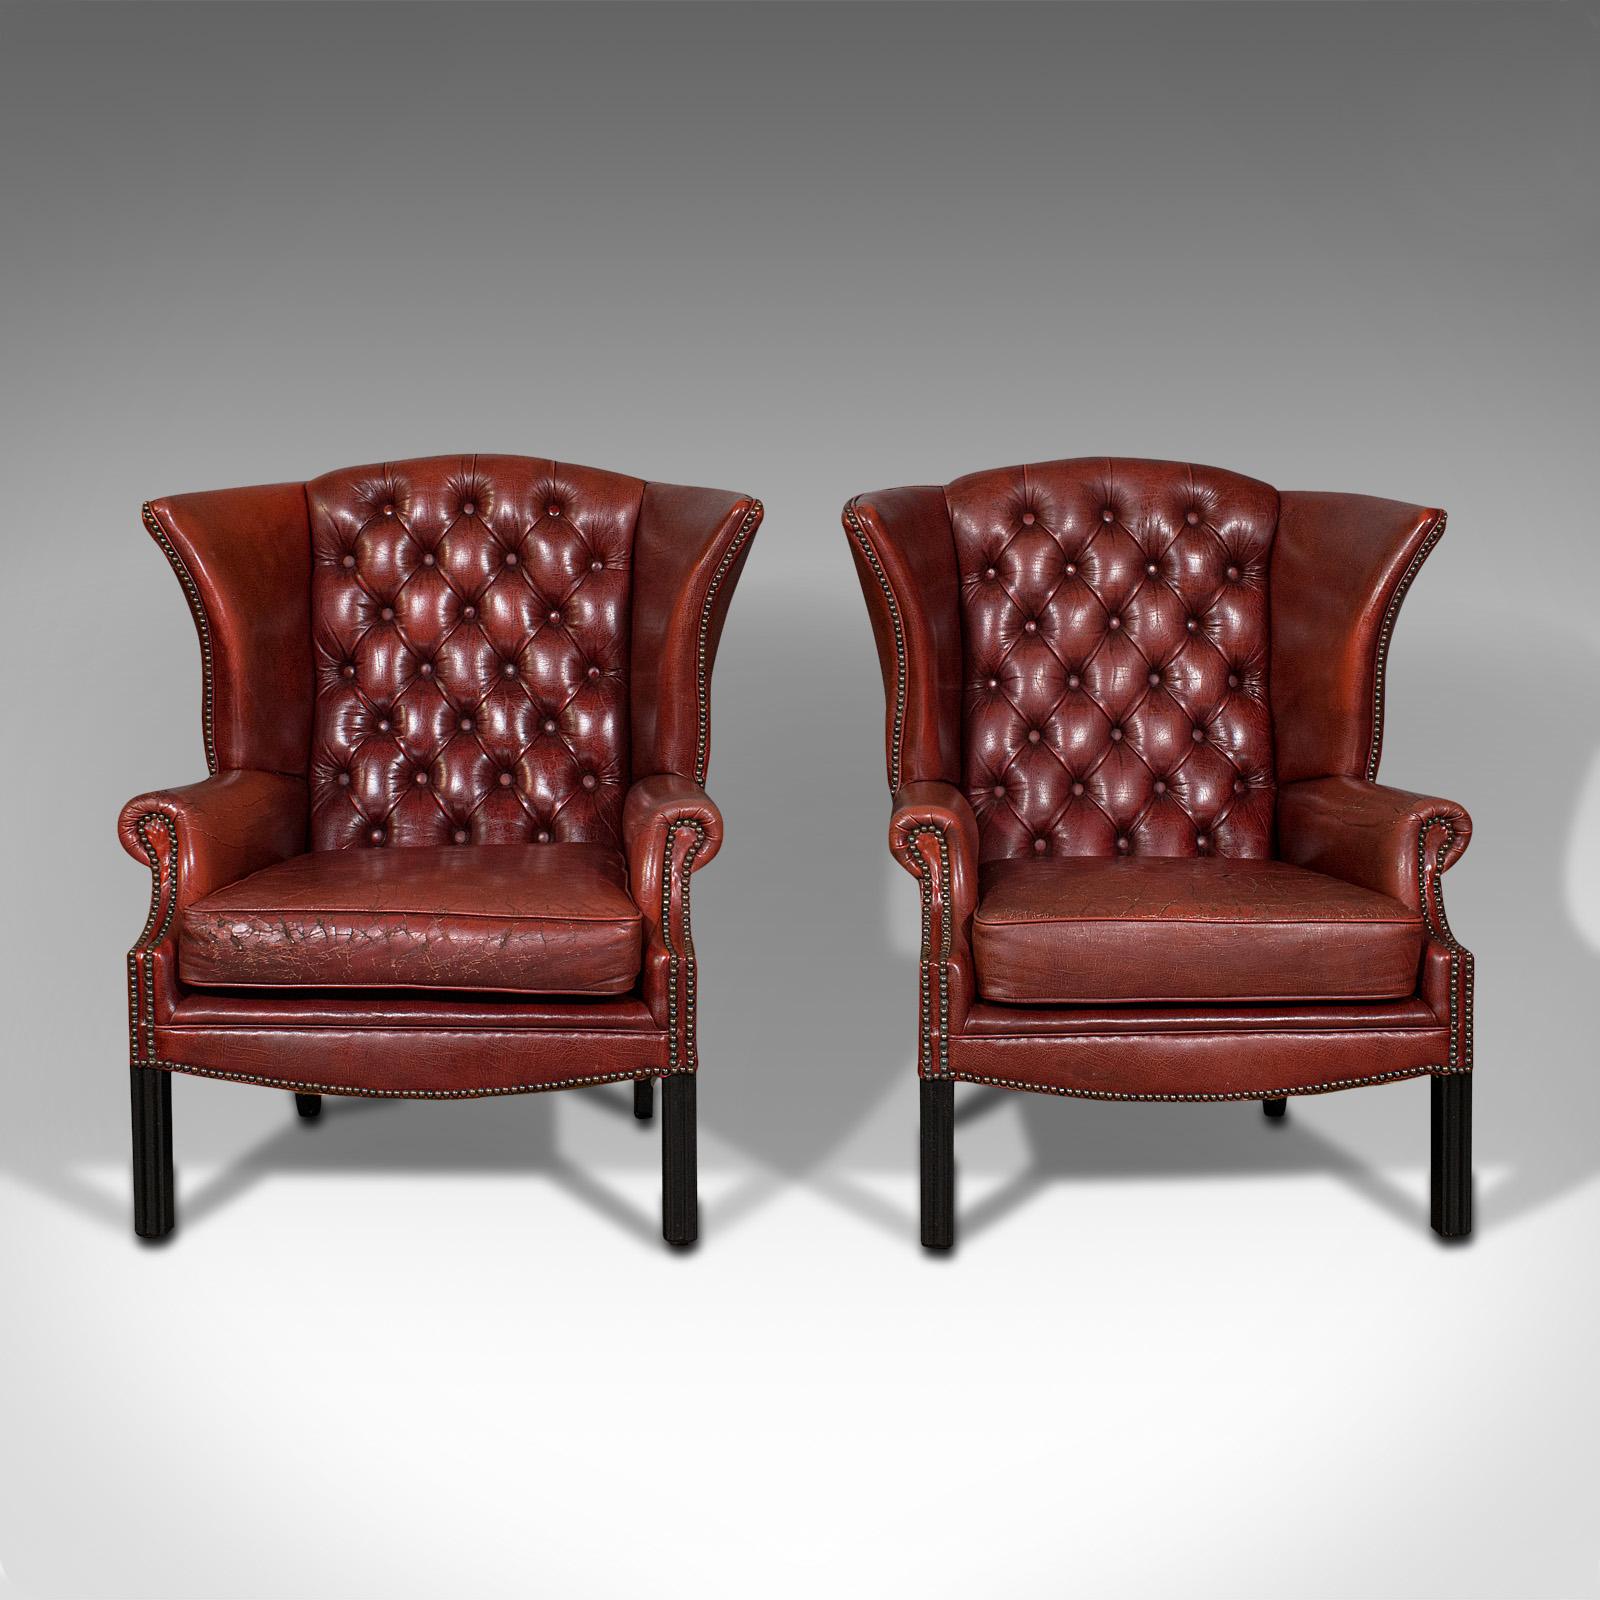 This is a pair of vintage clubhouse wingback chairs. an English, leather button back armchair, dating to the mid 20th century, circa 1950.

Charming club lounge chairs for keeping the fire heat at bay
Displaying a desirable aged patina